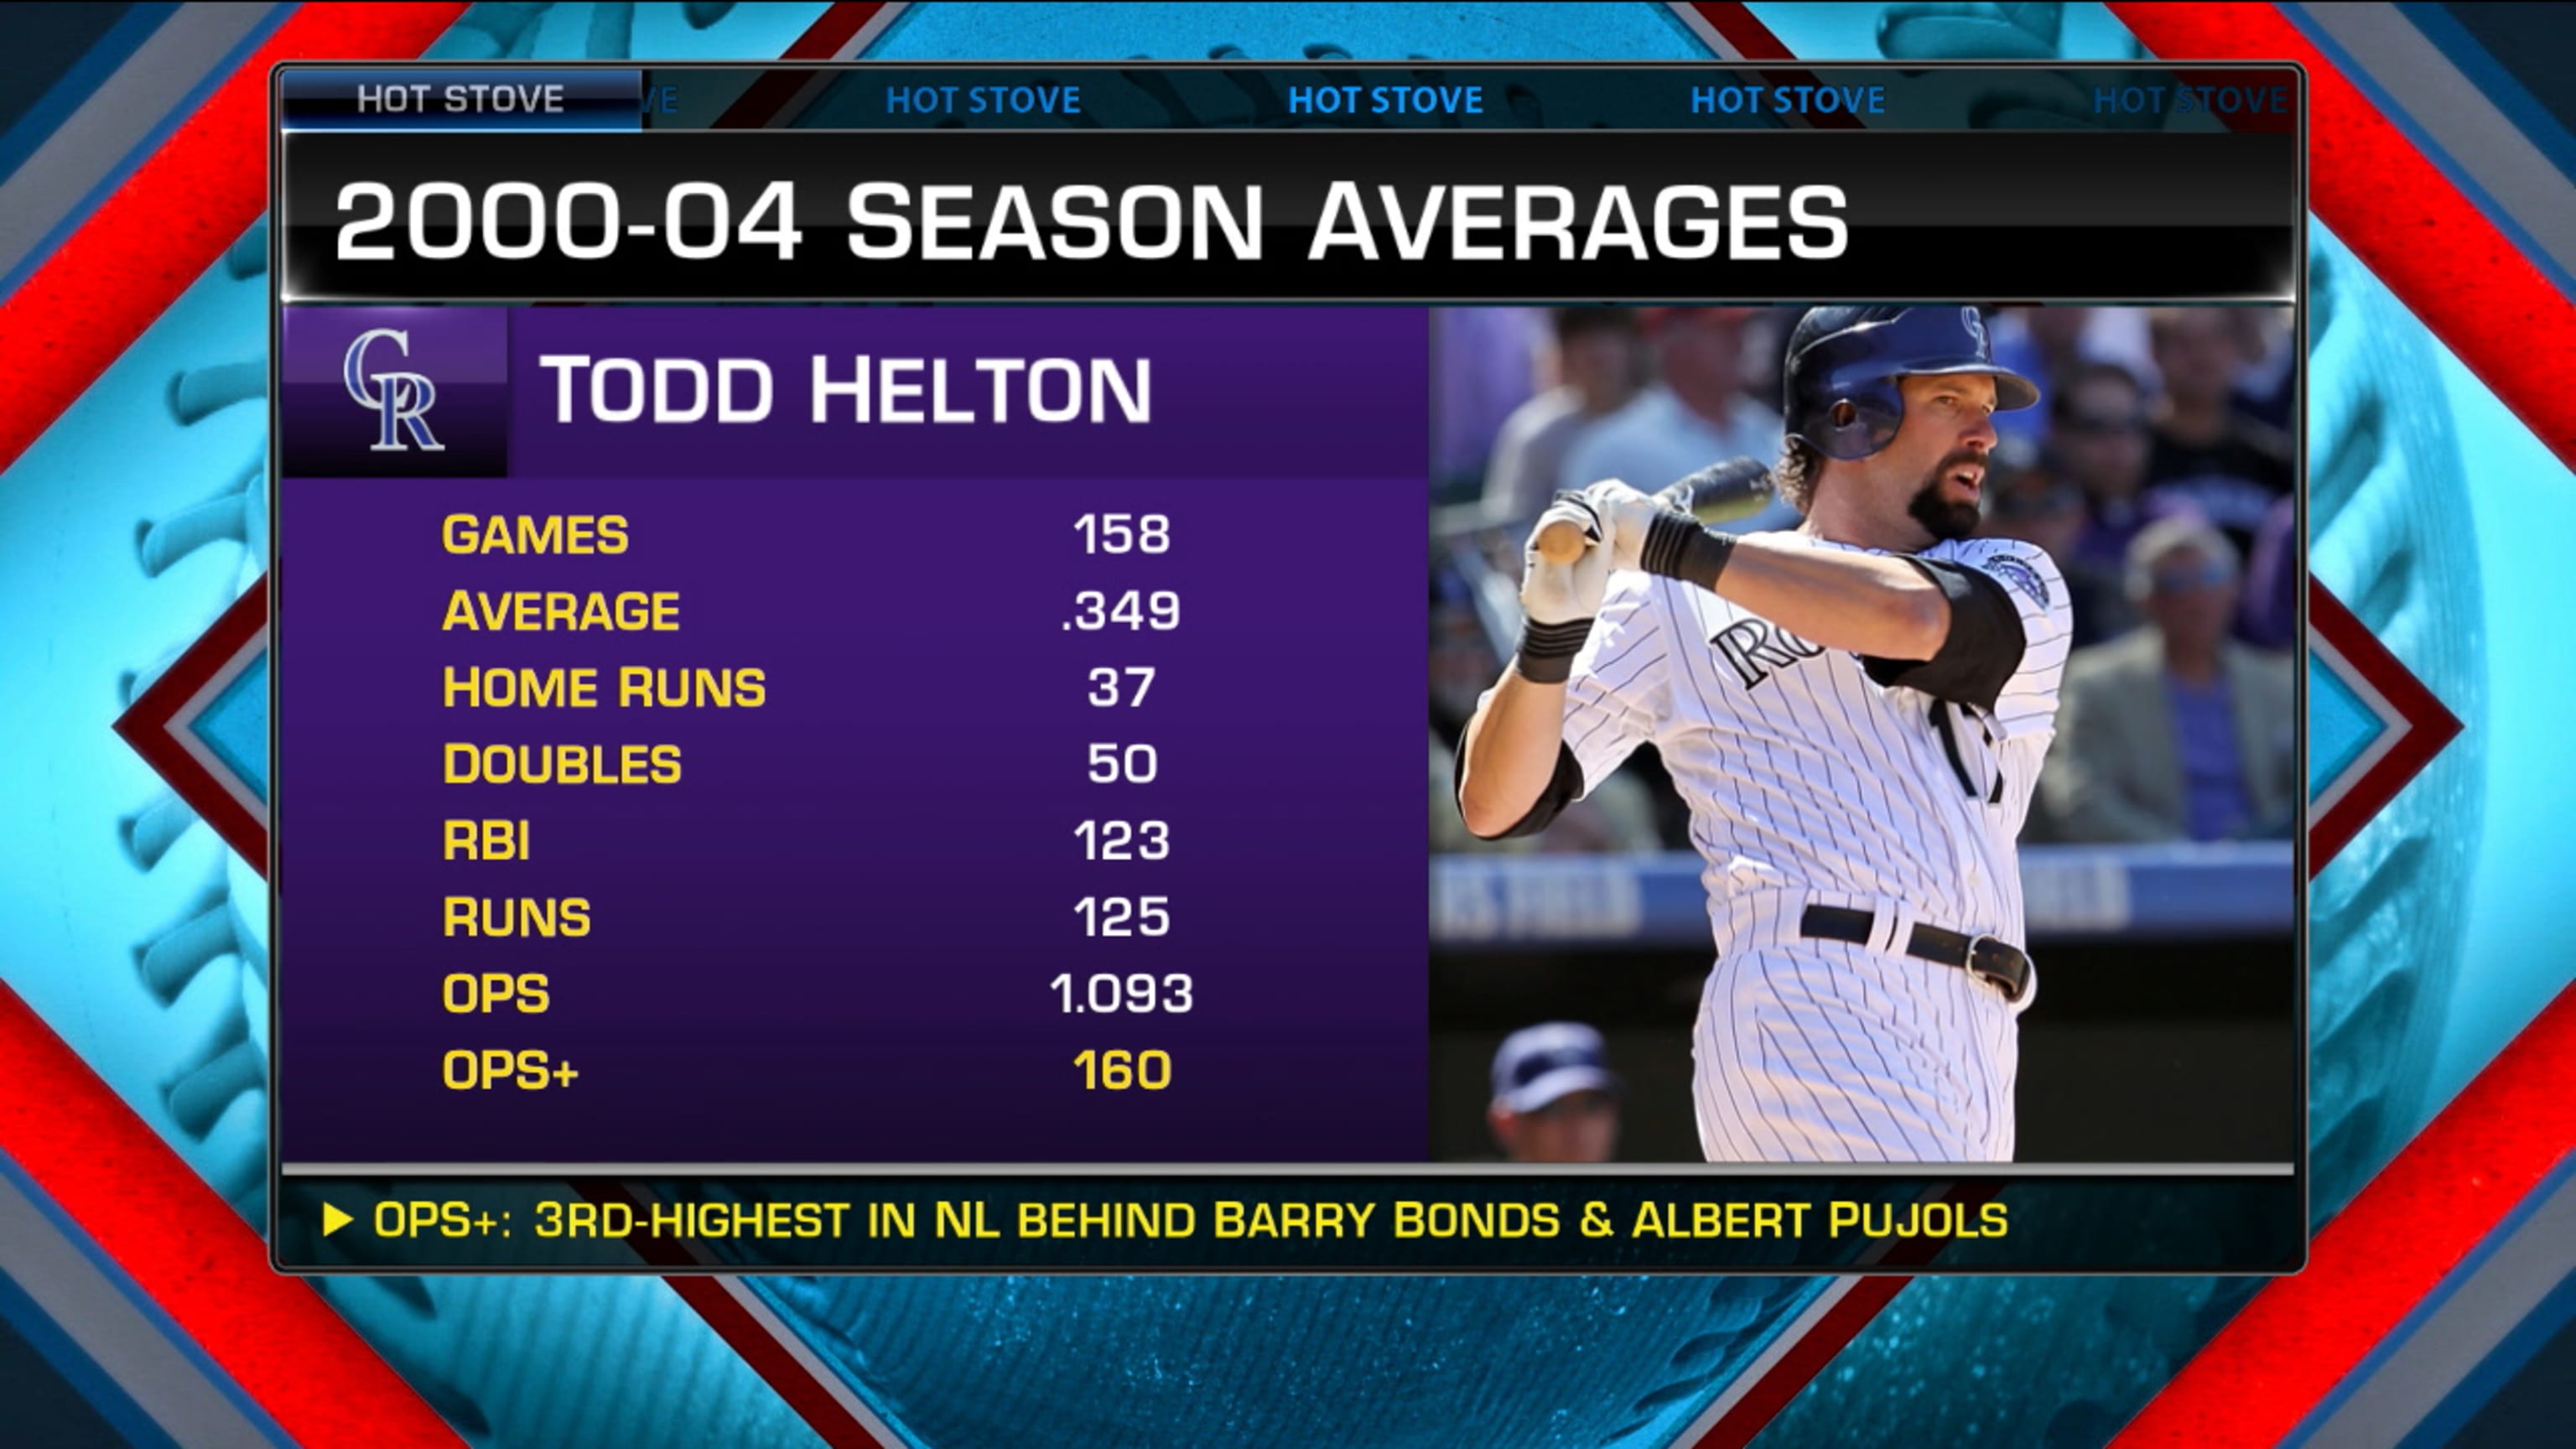 Todd Helton selected for induction into College Baseball Hall of Fame